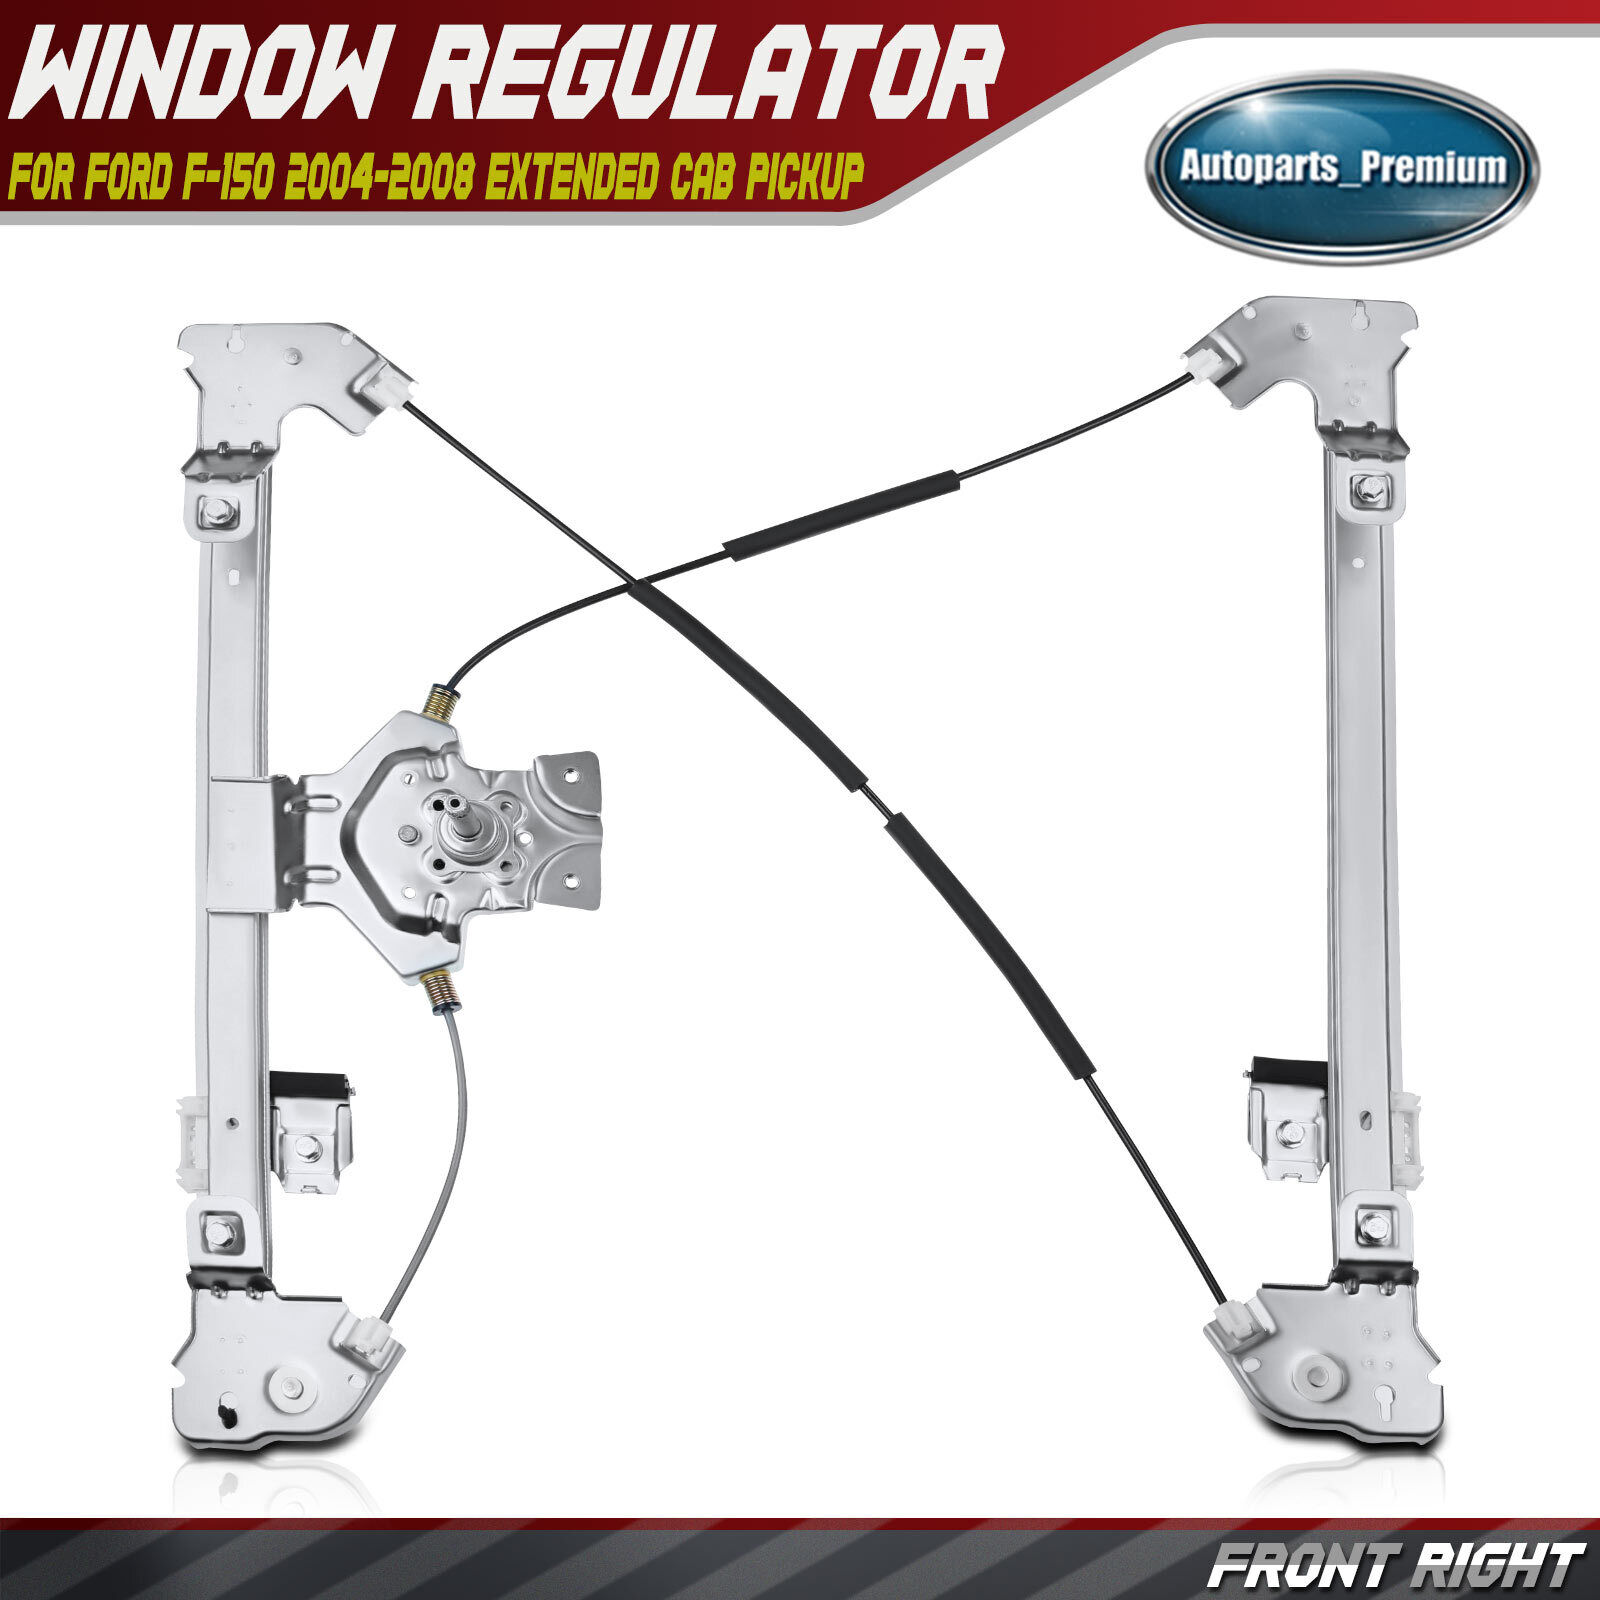 Manual Window Regulator for Ford F-150 2004-2008 Extended Cab Pickup Front Right